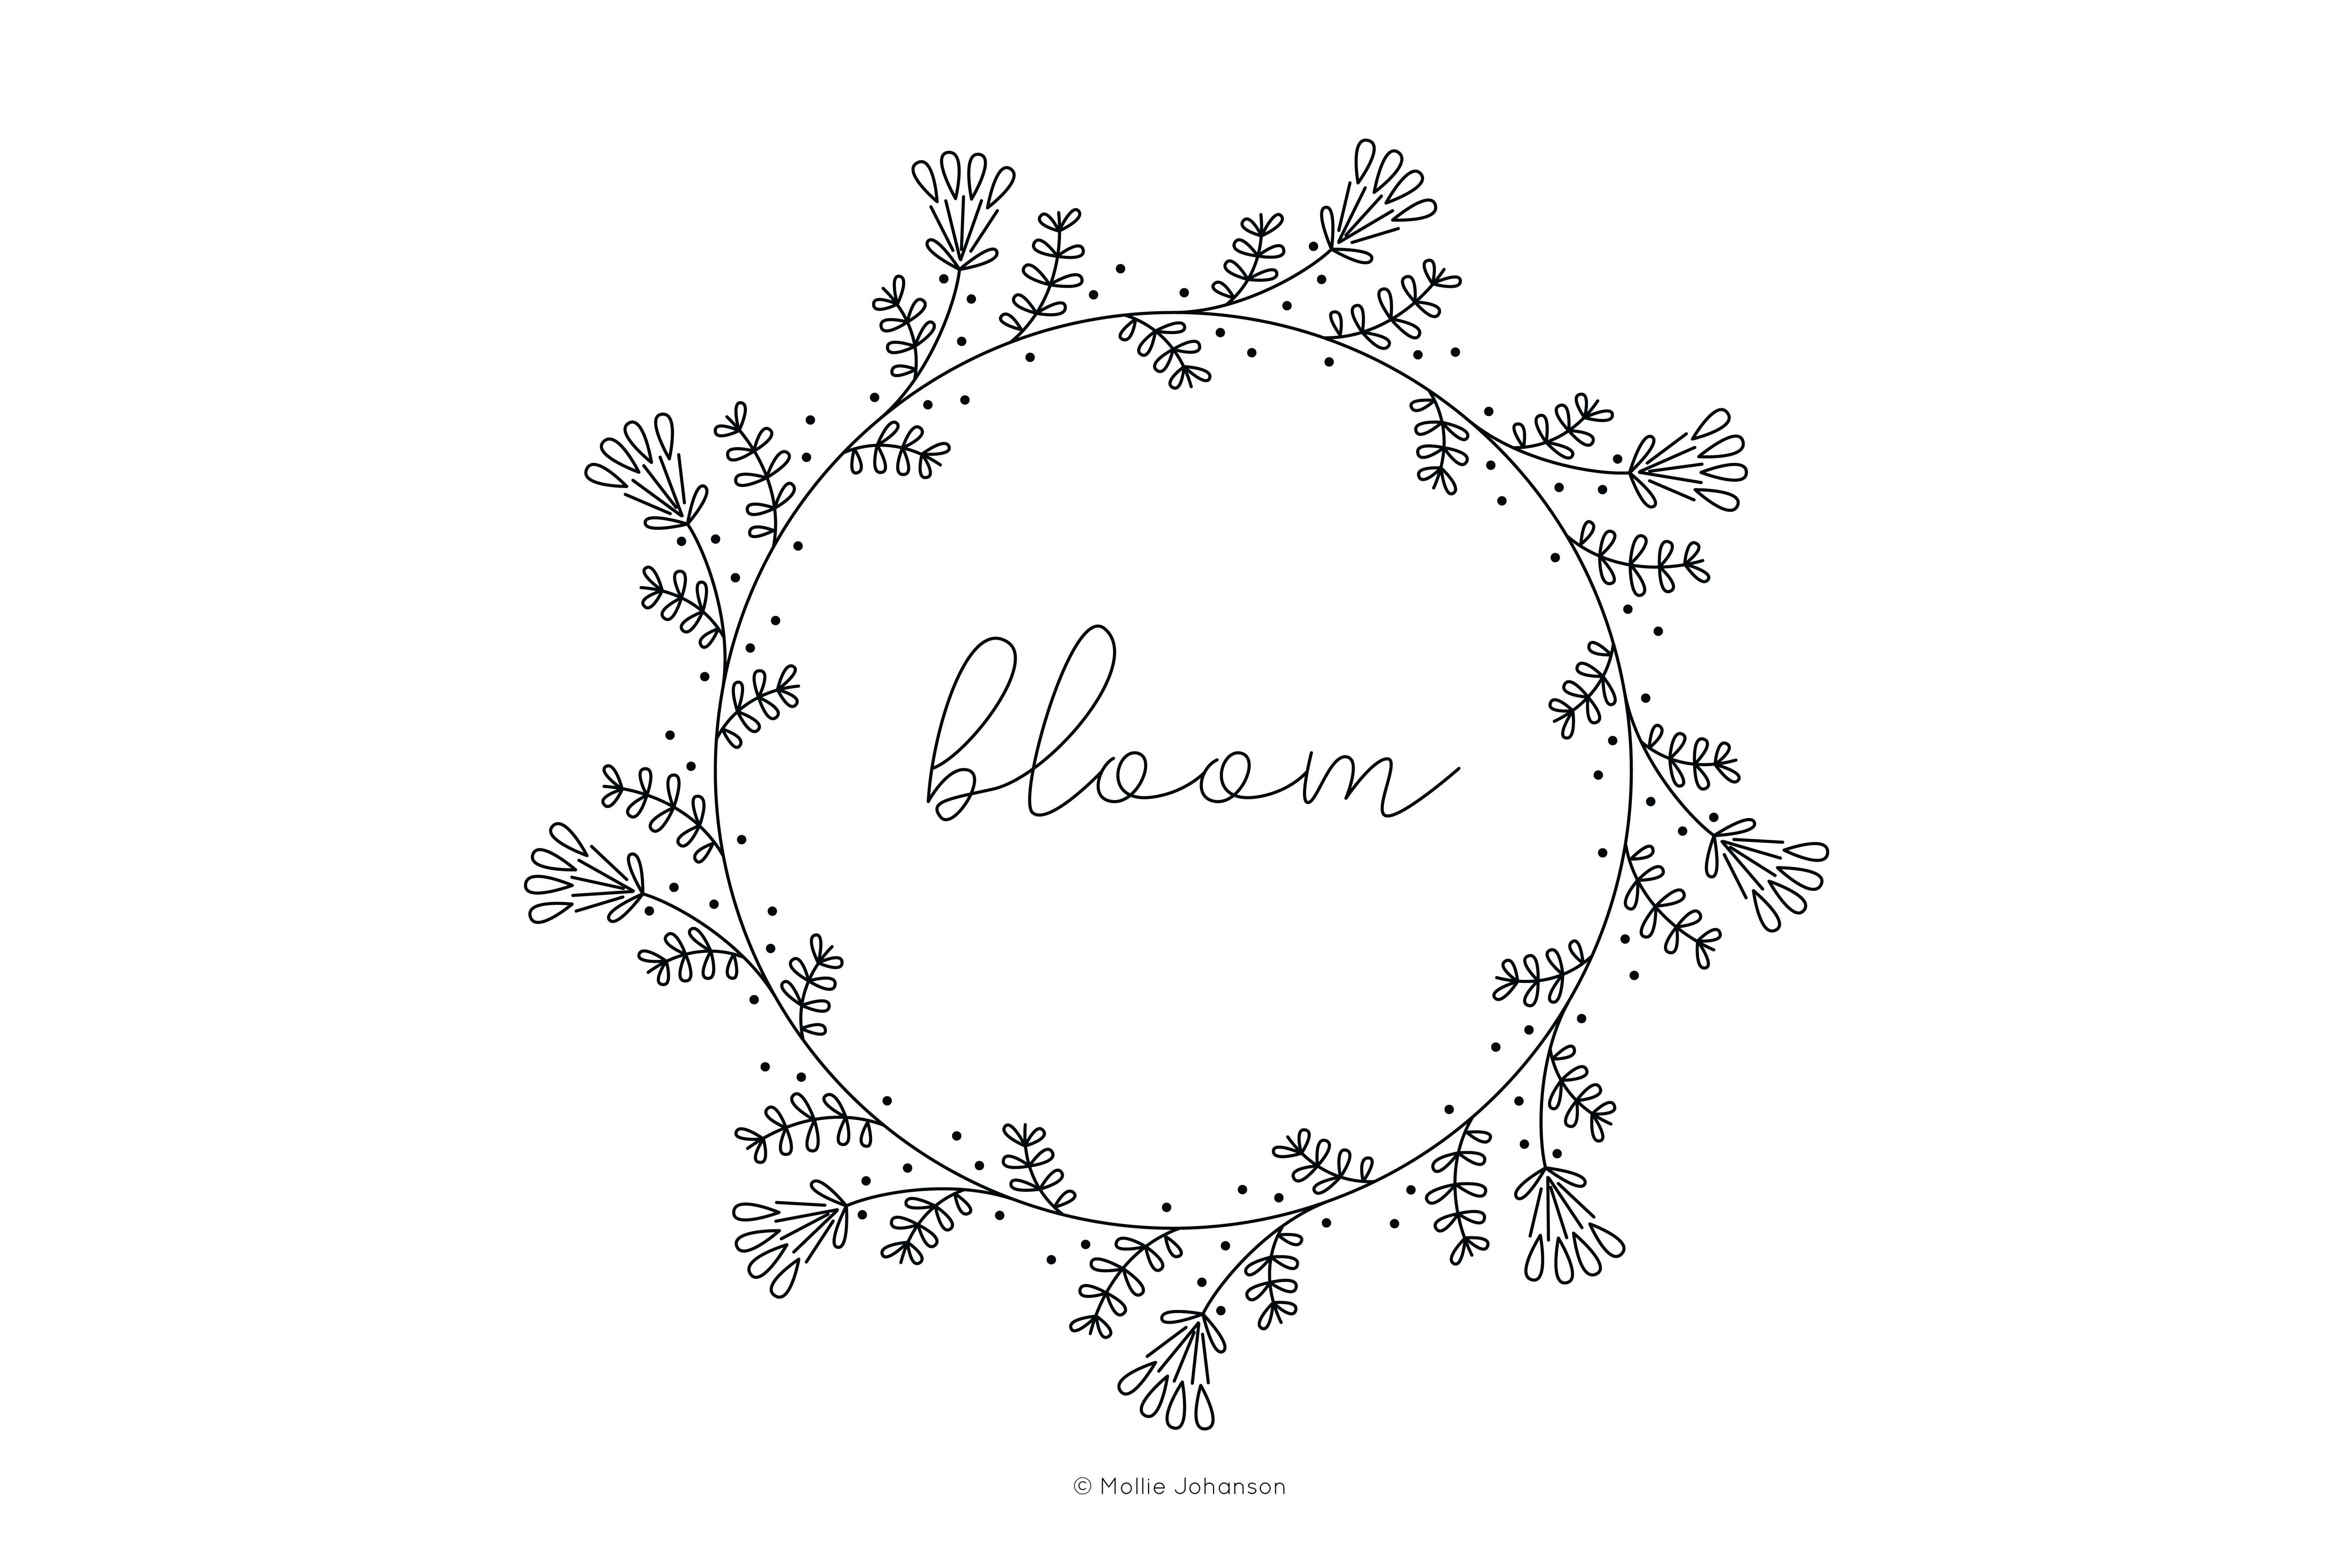 Free Vintage Embroidery Patterns Download Free Vintage Inspired Bloom Embroidery Pattern